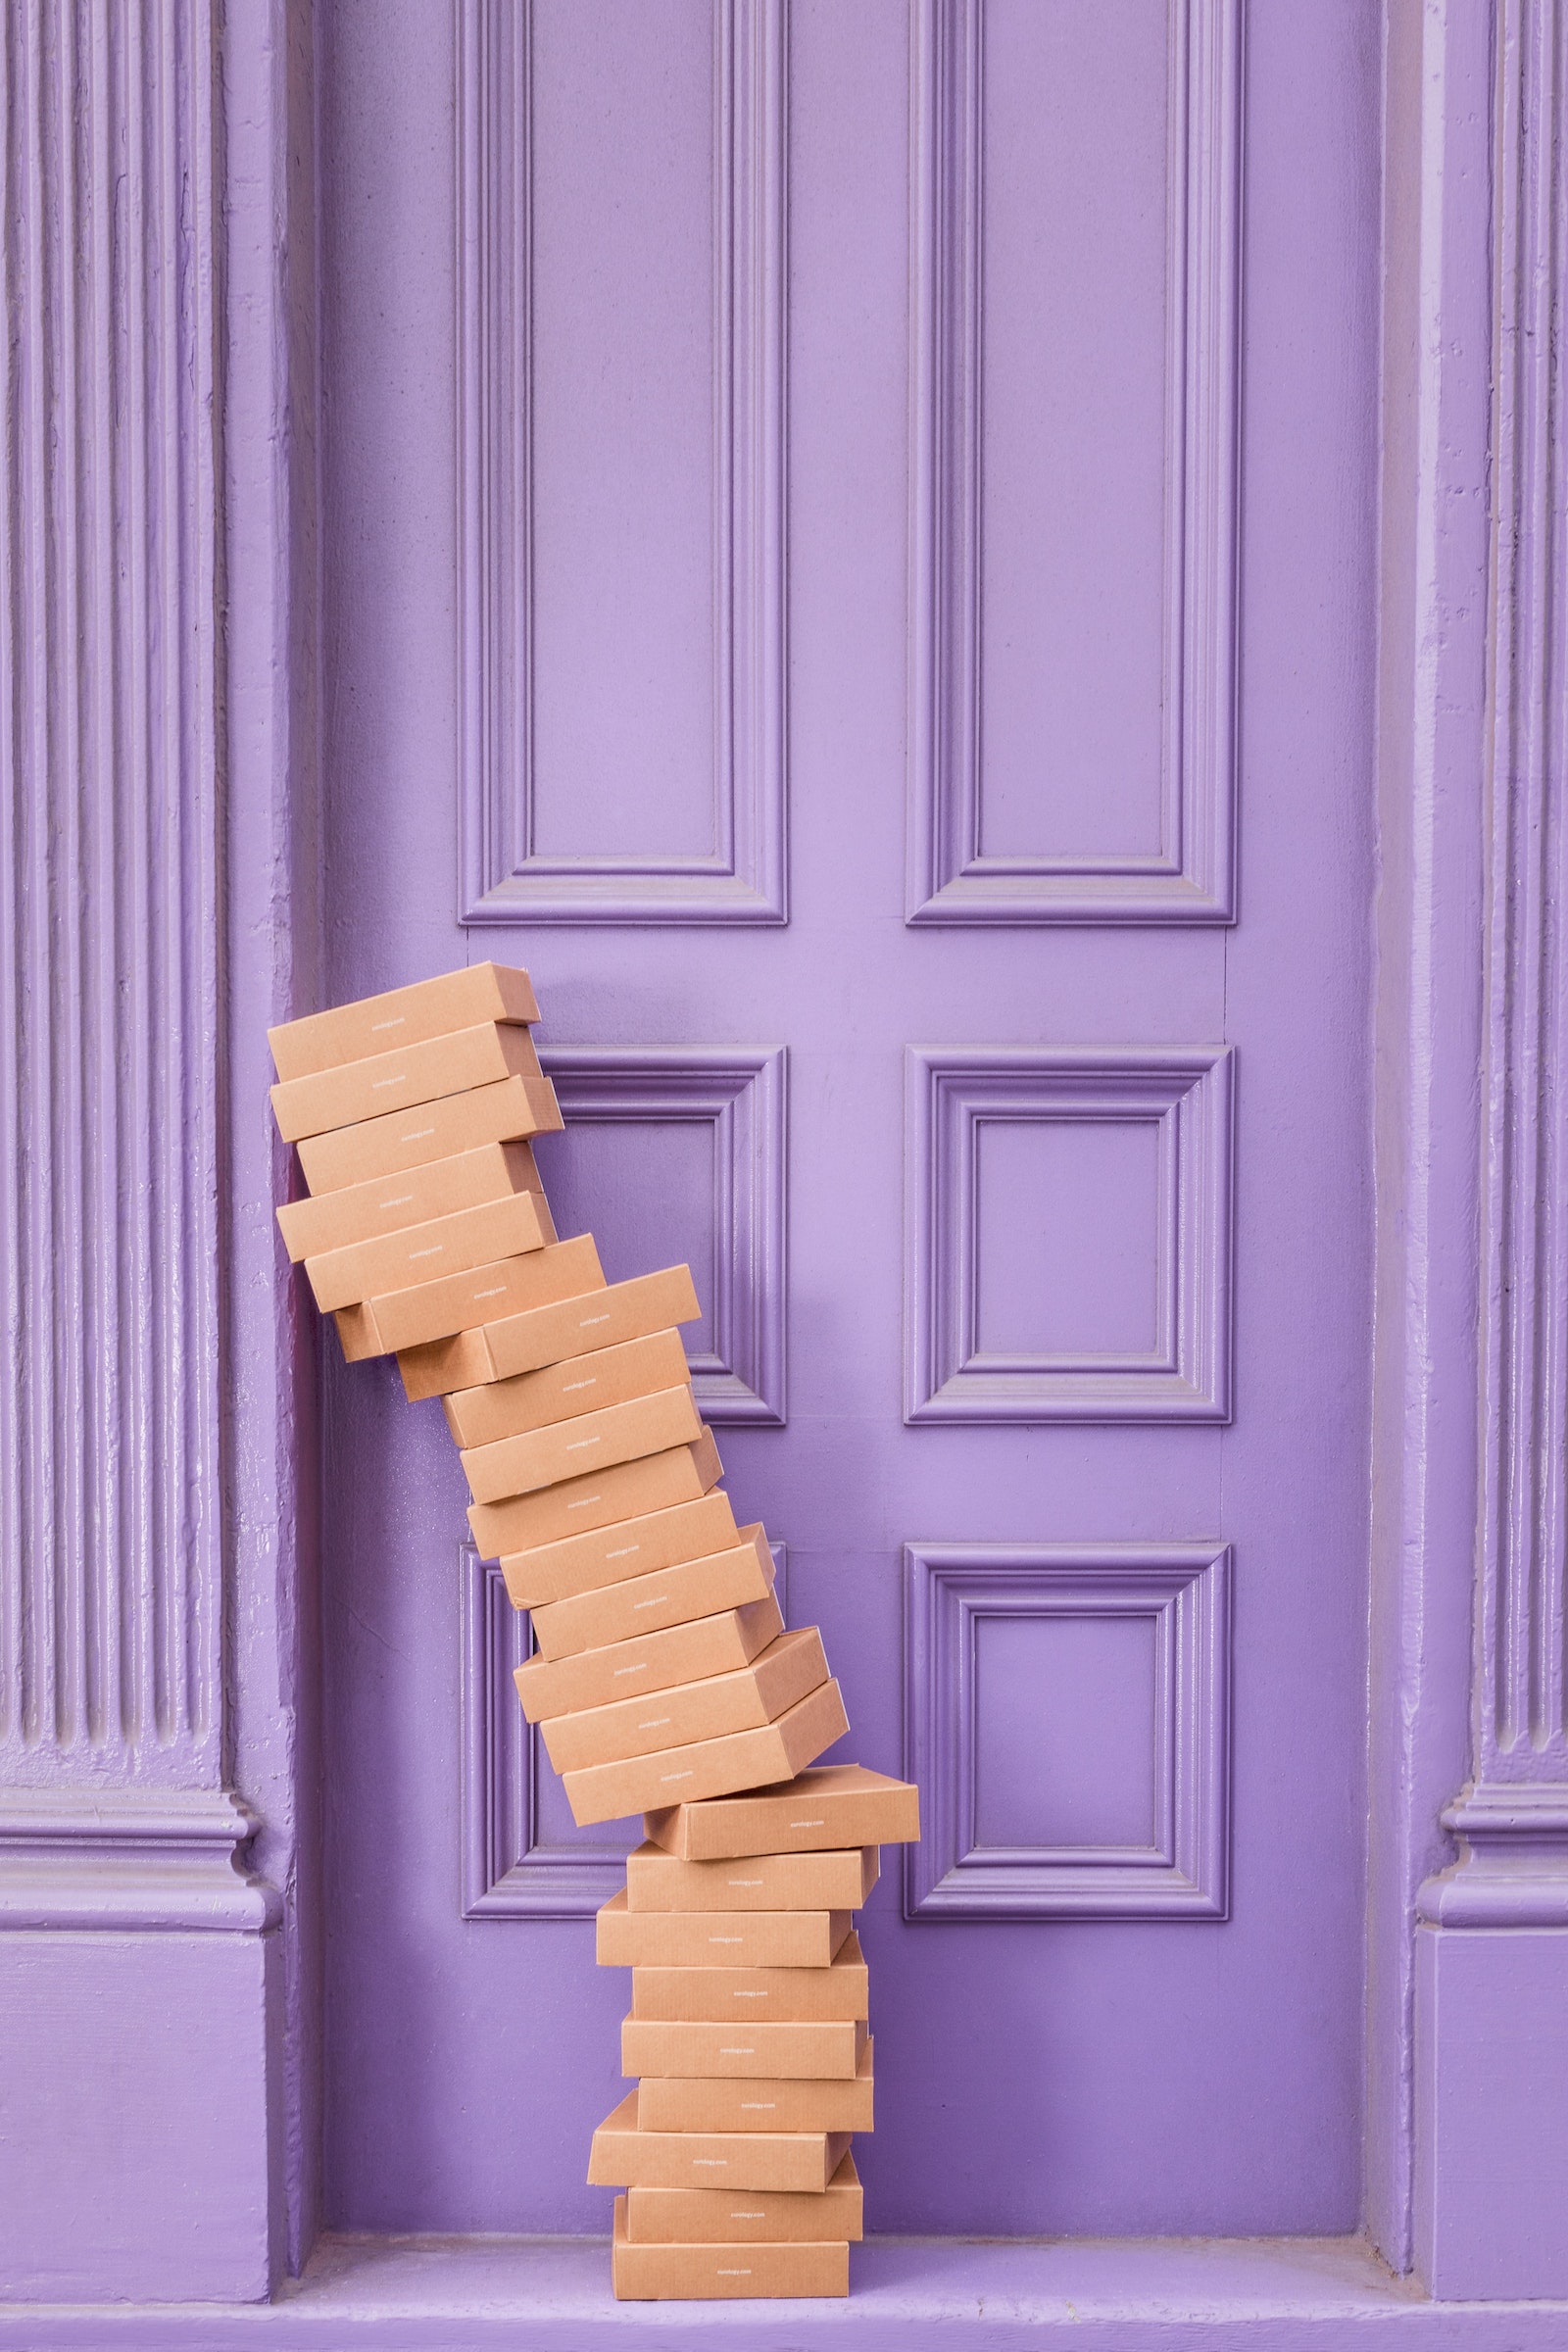 Lavender door with boxes